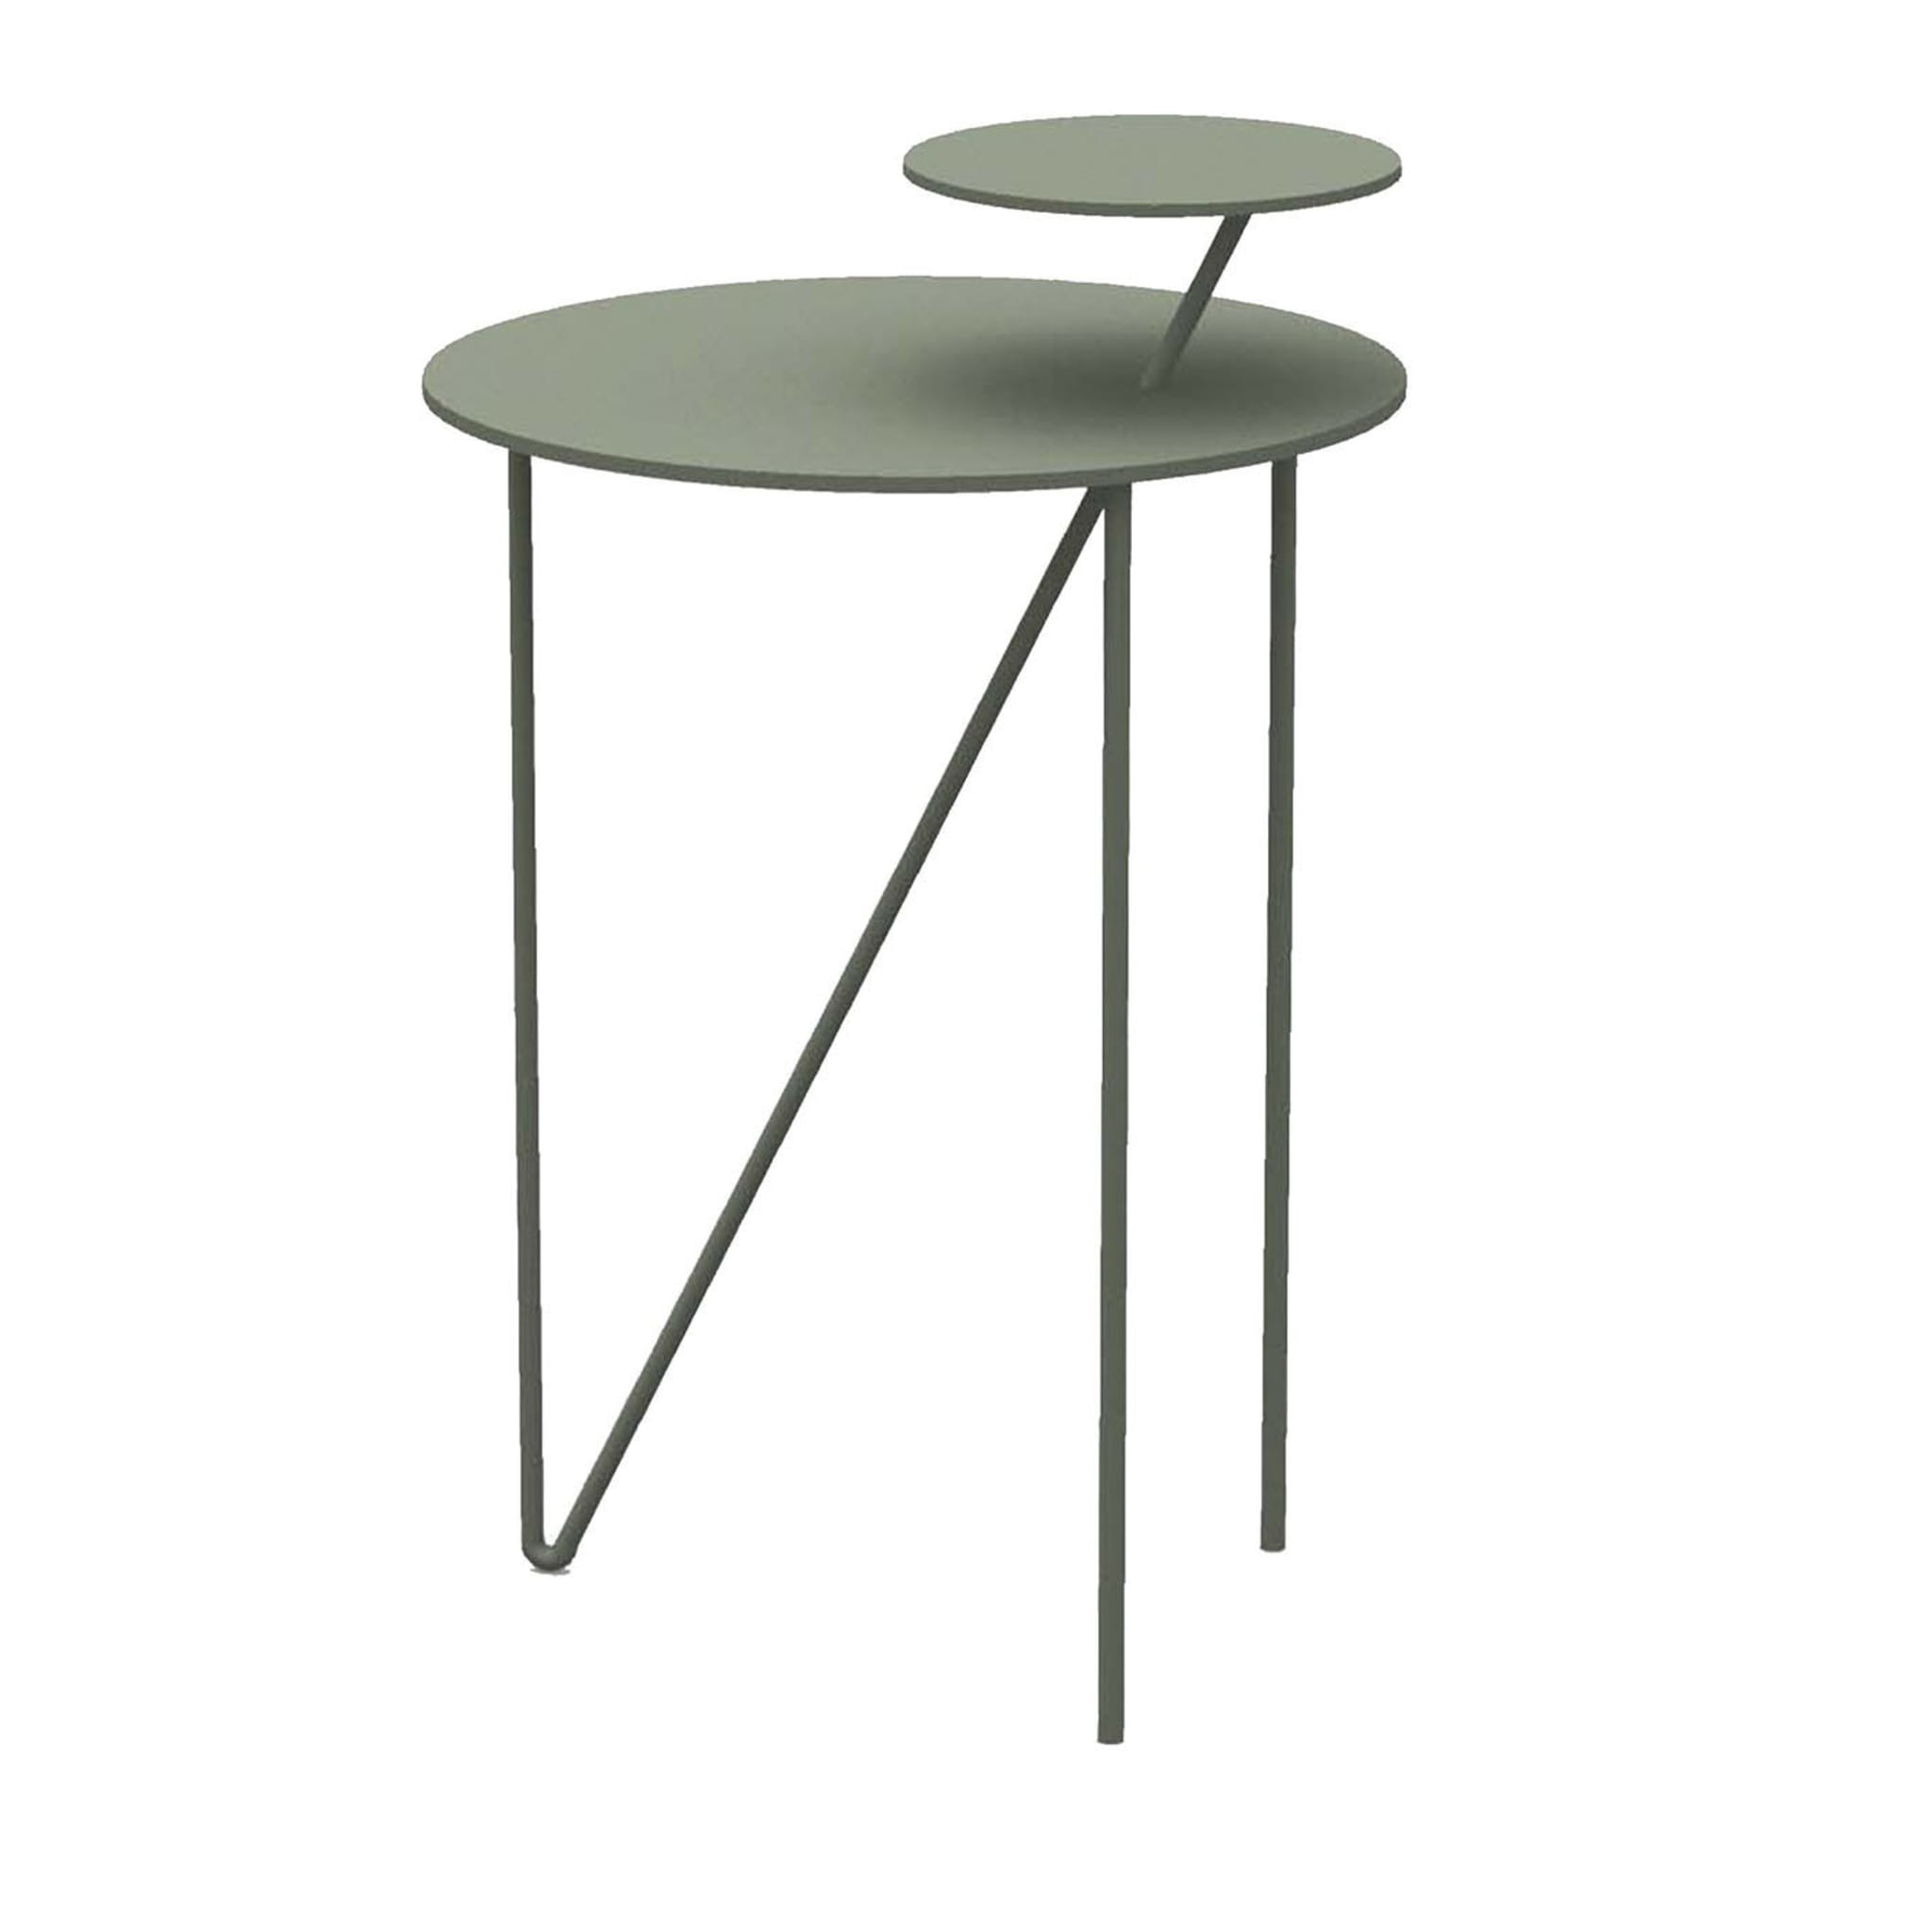 Passante Tall Sage Green Coffee Table - Alternative view 1